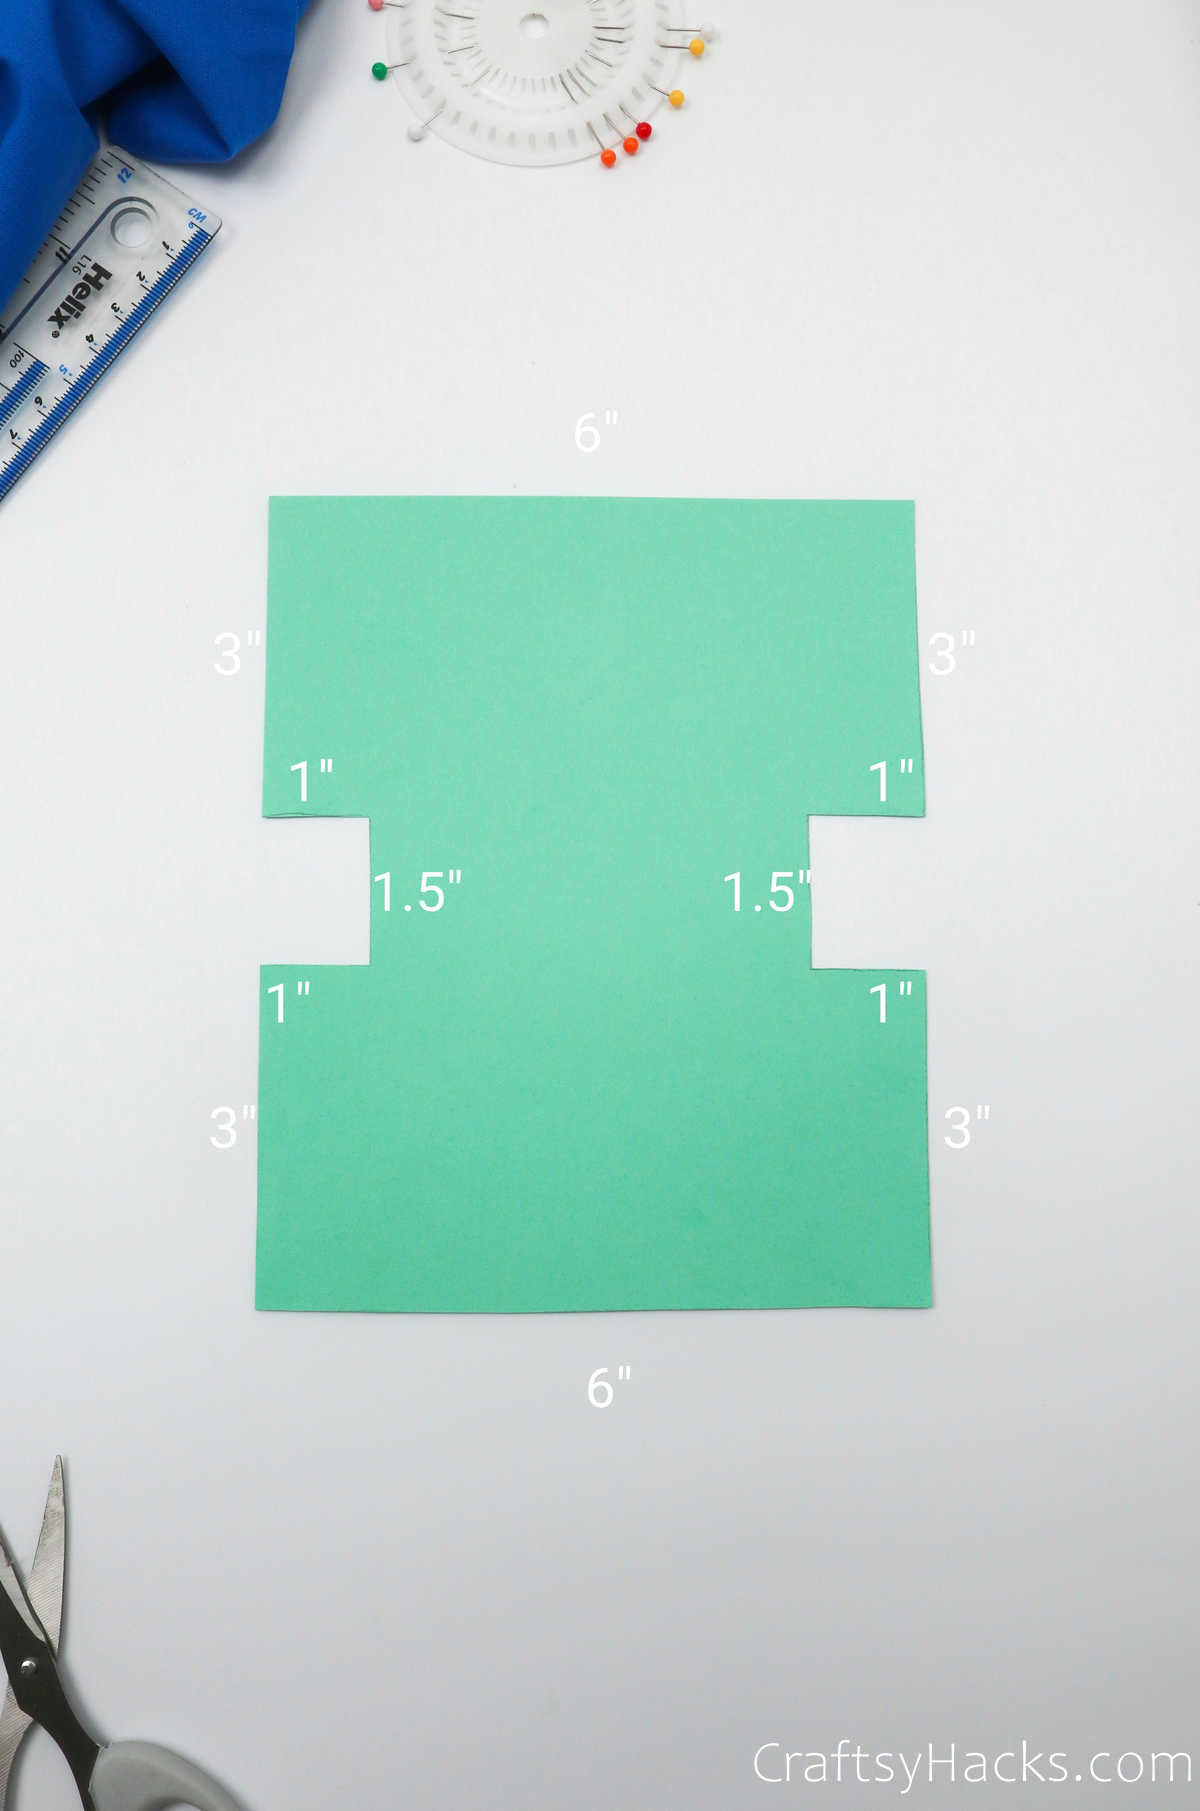 cut paper with measurments